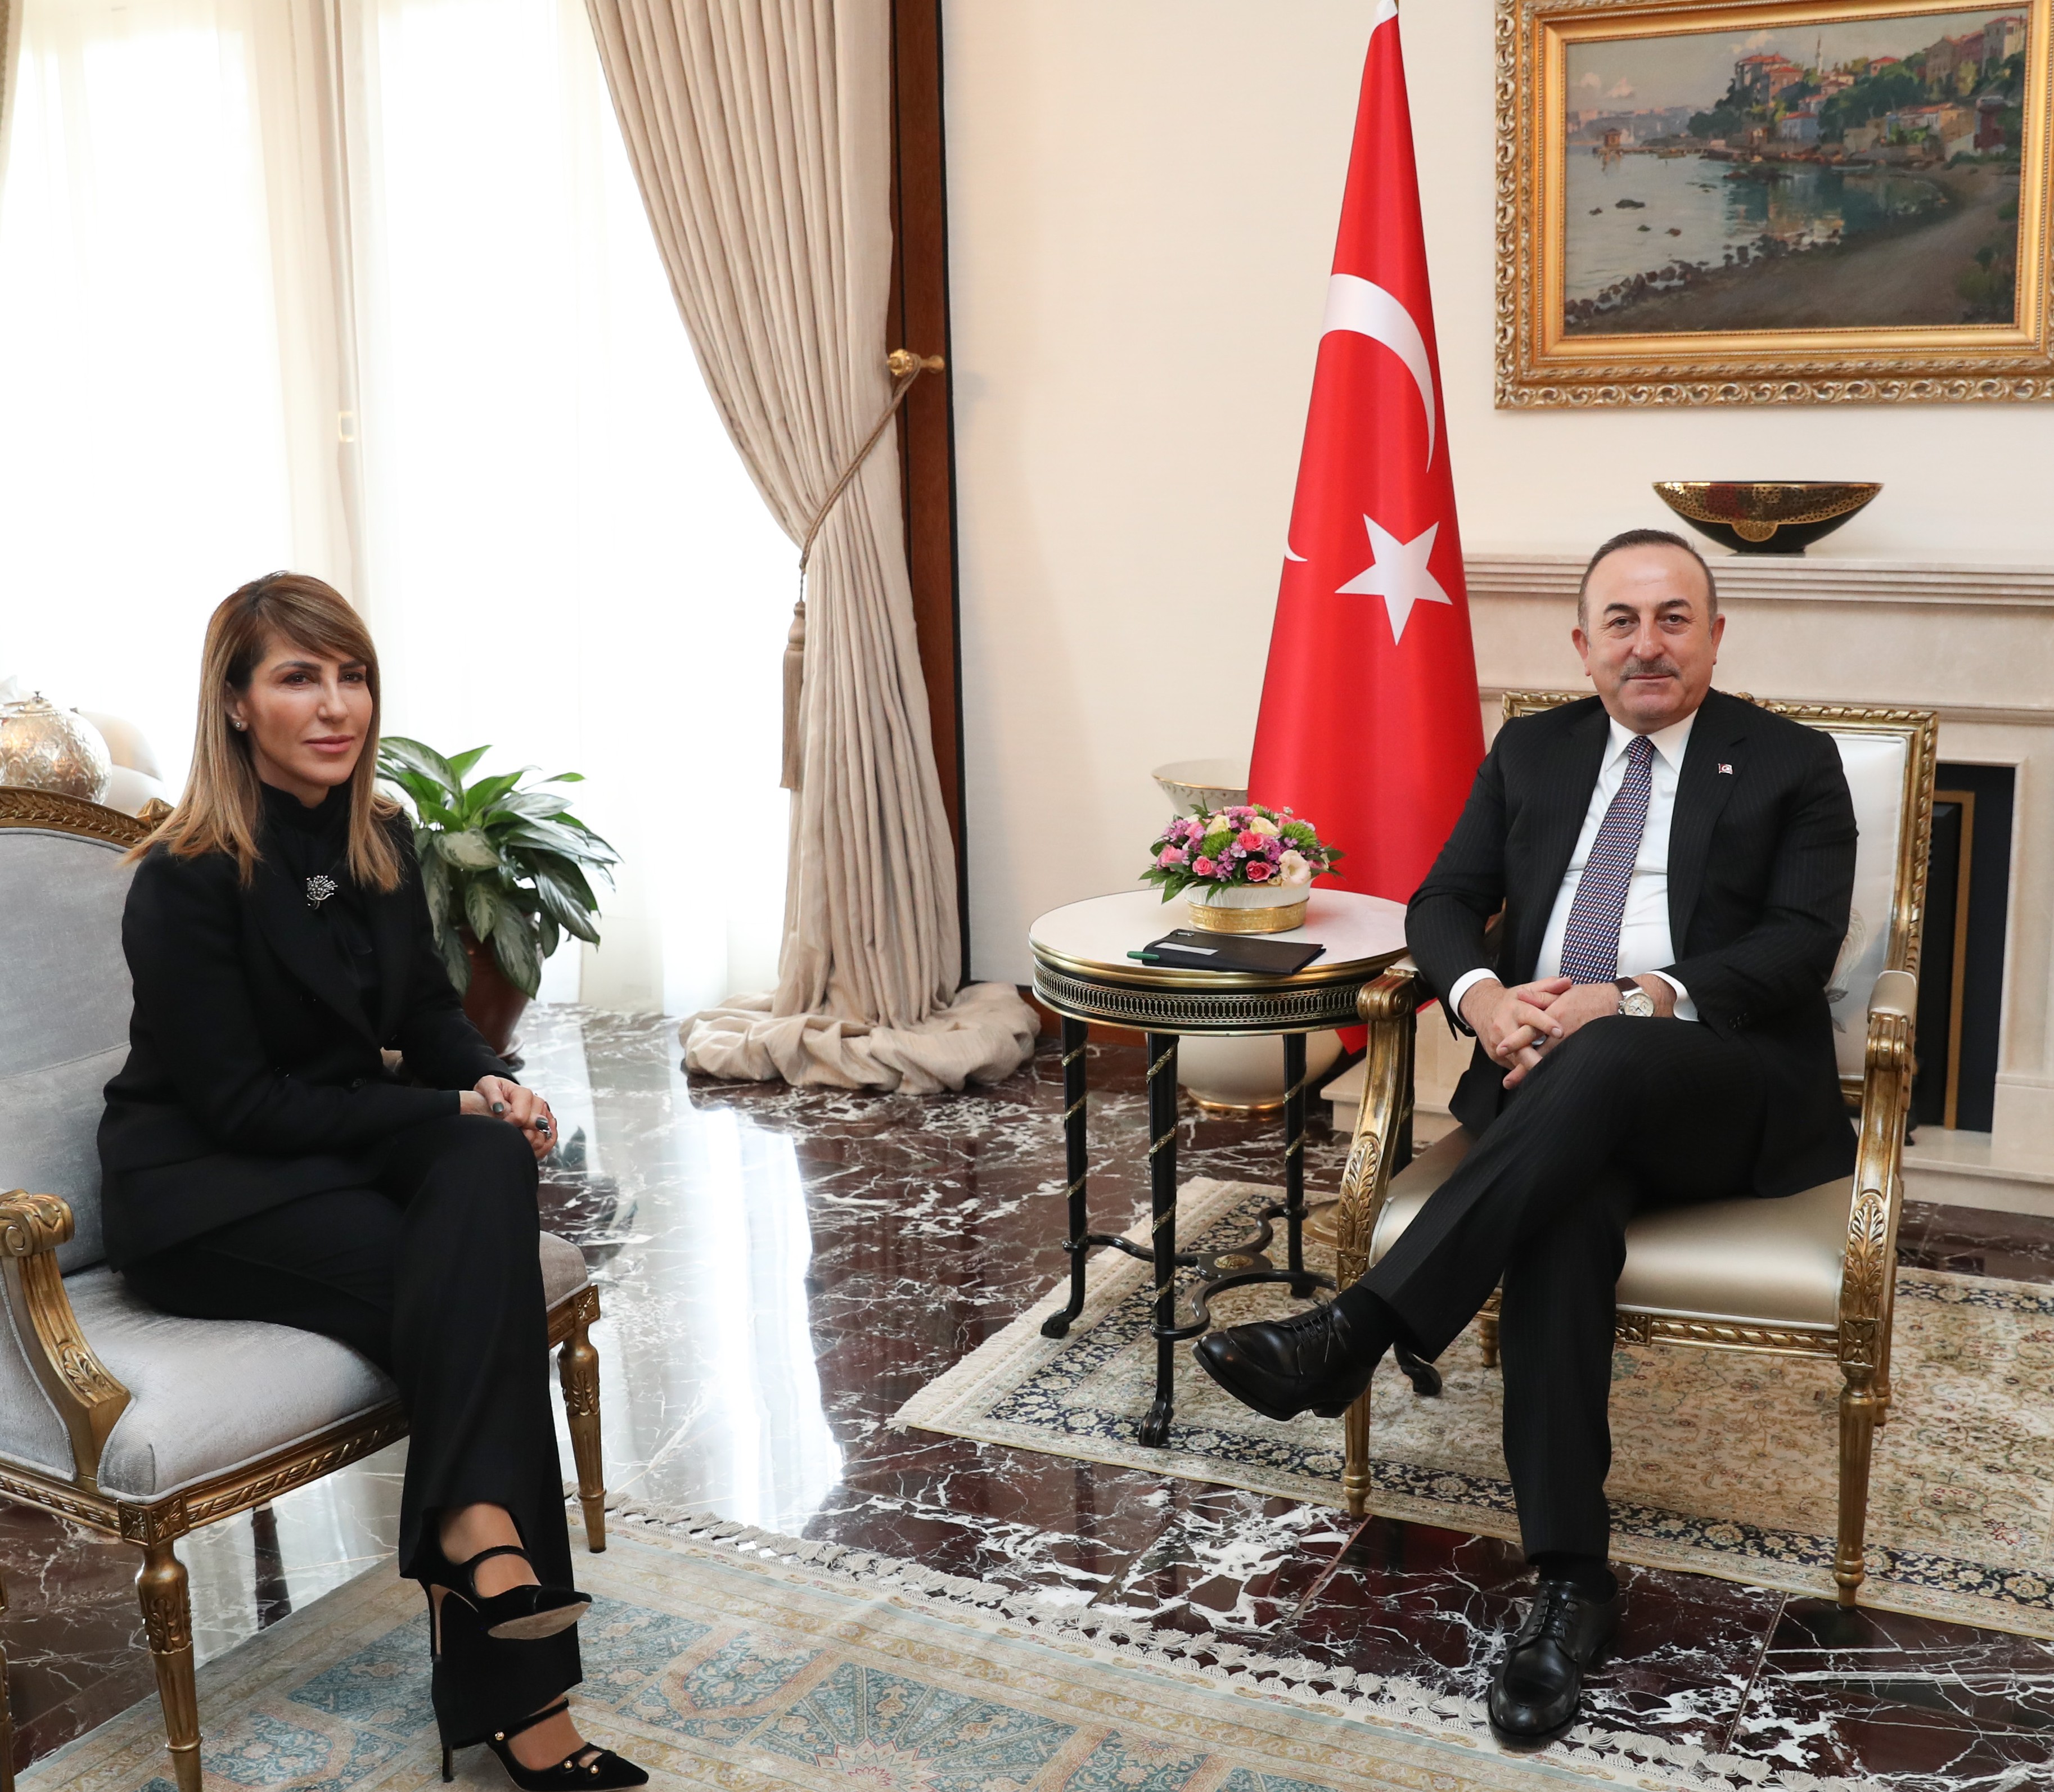 Majlinda Bregu, Secretary General of the Regional Cooperation Council (RCC) at the meeting with Mevlüt Çavuşoğlu, Minister of Foreign Affairs of Turkey in Ankara on 10 February 2020 (Photo: Courtesy of Turkish MFA)